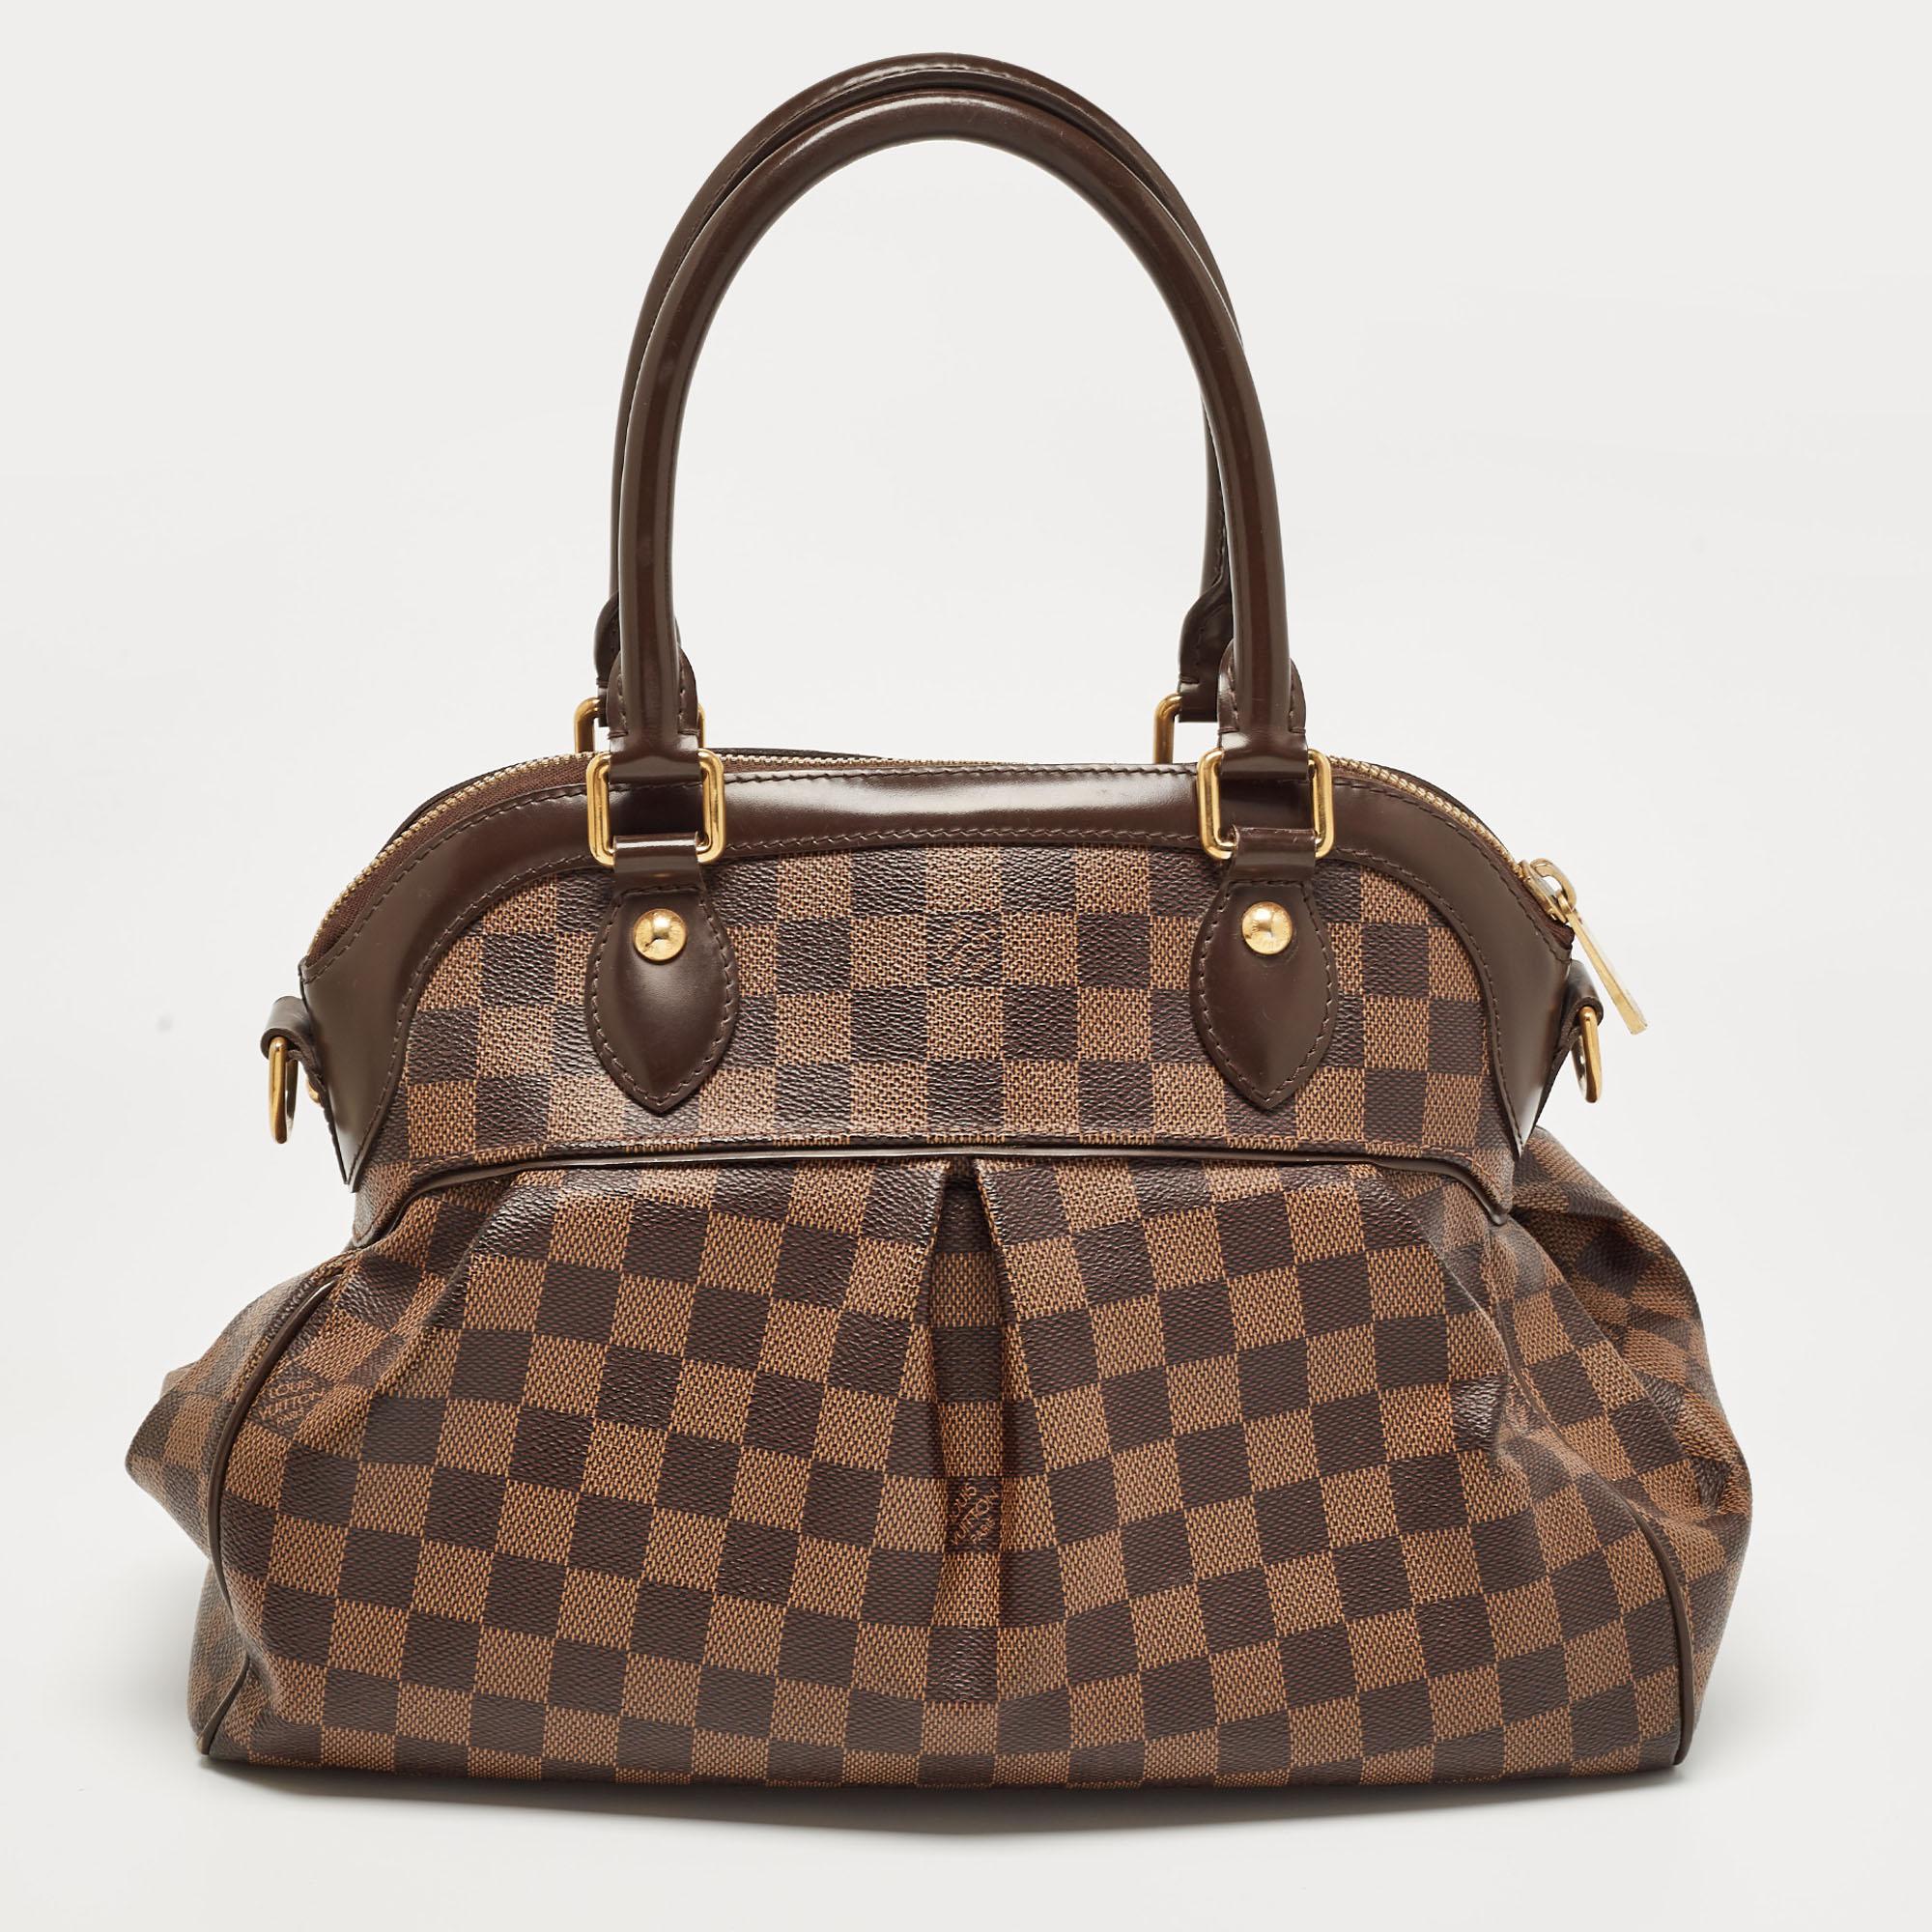 Displaying exquisite craftsmanship, this fabulous LV bag will certainly live up to your expectations. Featuring a chic design, it is made from luxe materials and has a roomy interior for carrying your essentials.

Includes: Detachable Strap